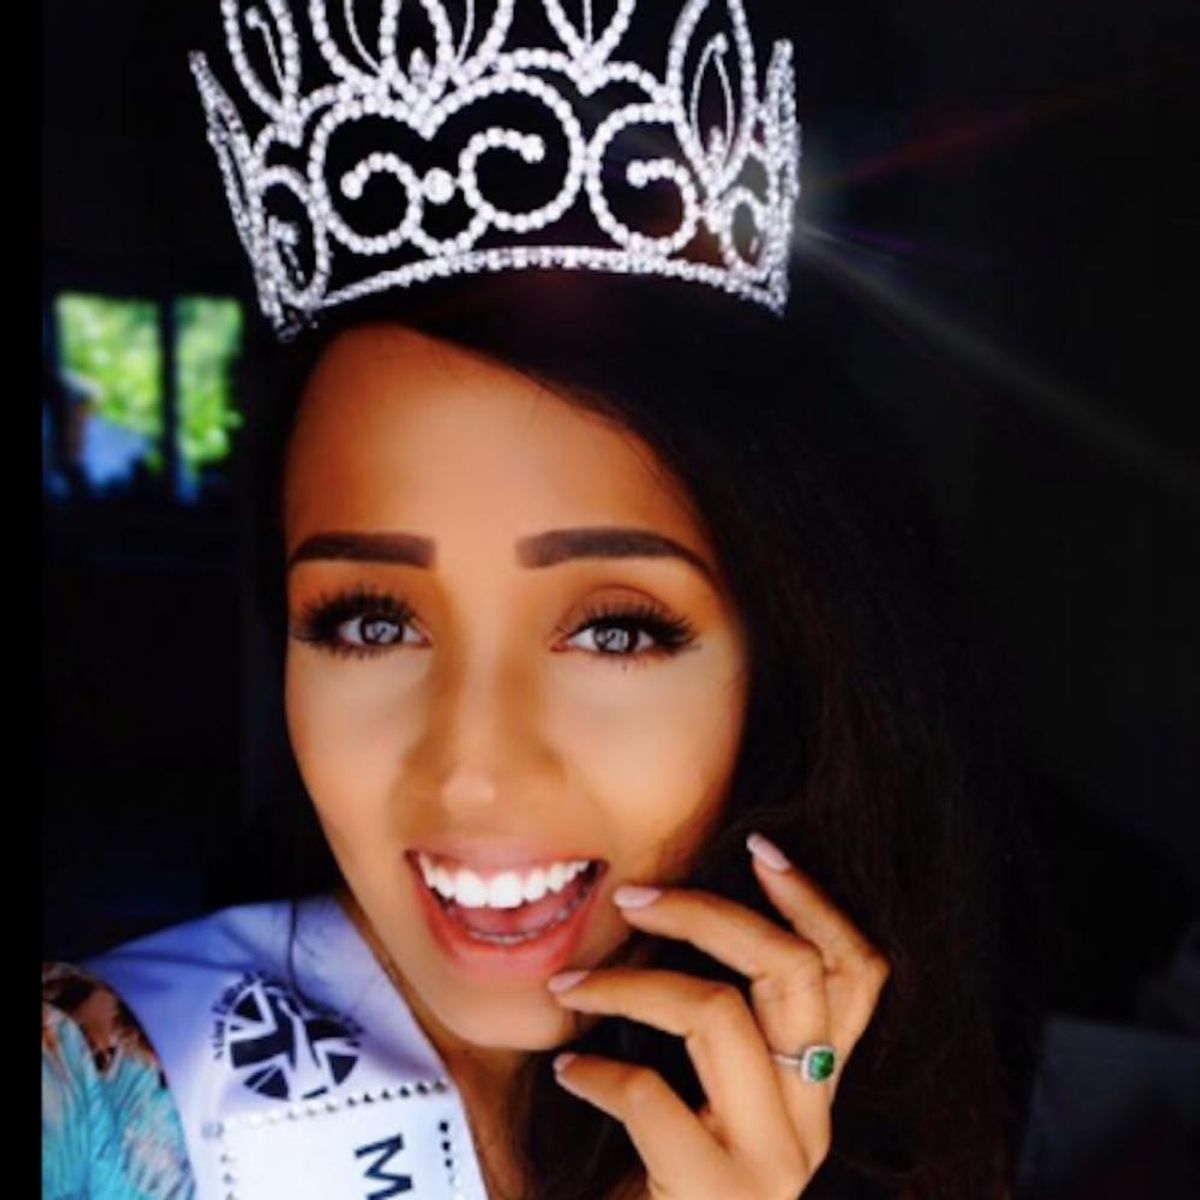 This Beauty Queen Returned Her Crown After She Was Body Shamed by the Organization